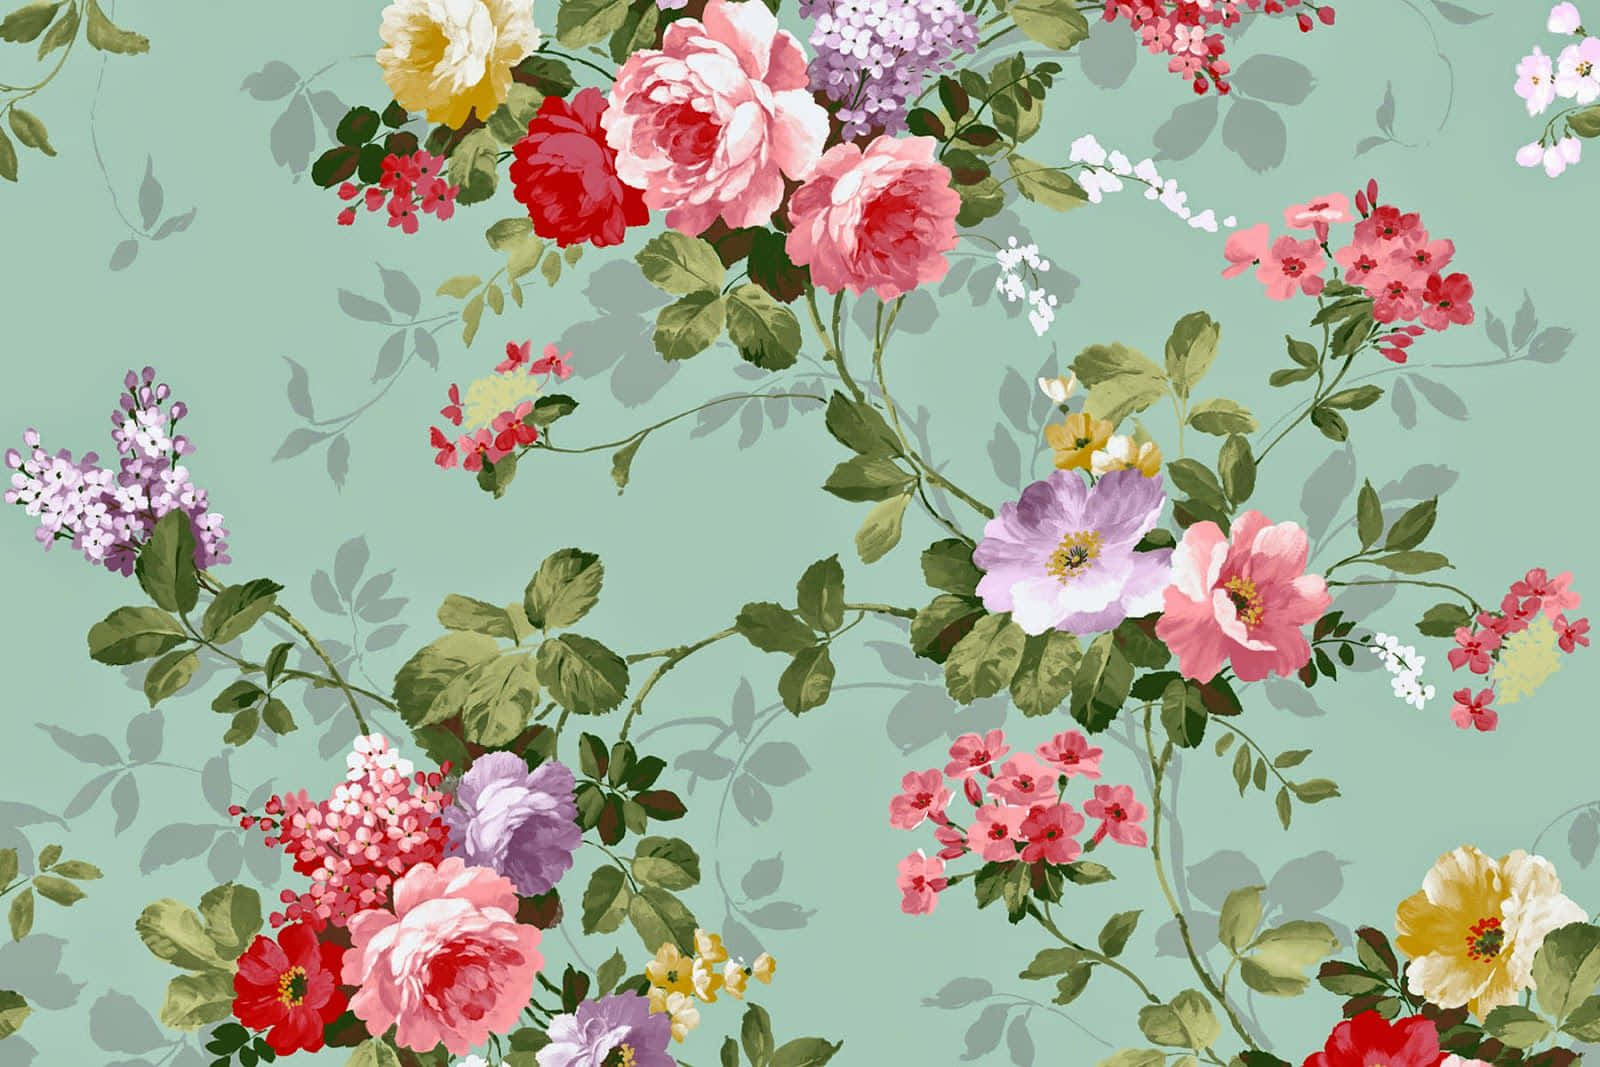 A Floral Wallpaper With Pink And Red Flowers